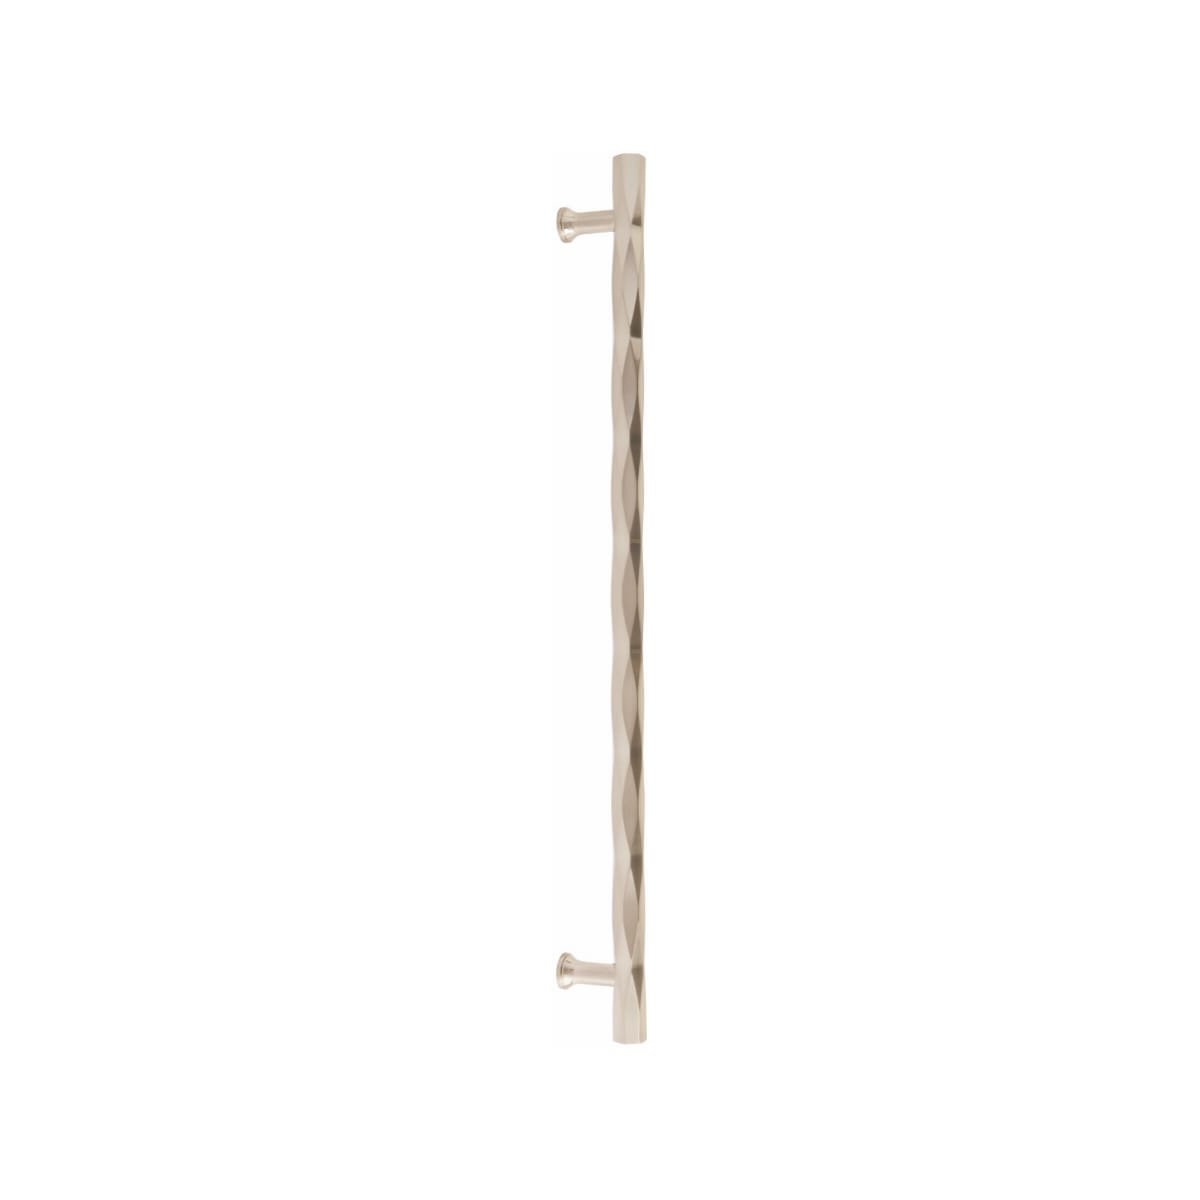 CS87006US15 - Concealed Surface Mount - Tribeca Appliance Pull - 18" - Satin Nickel